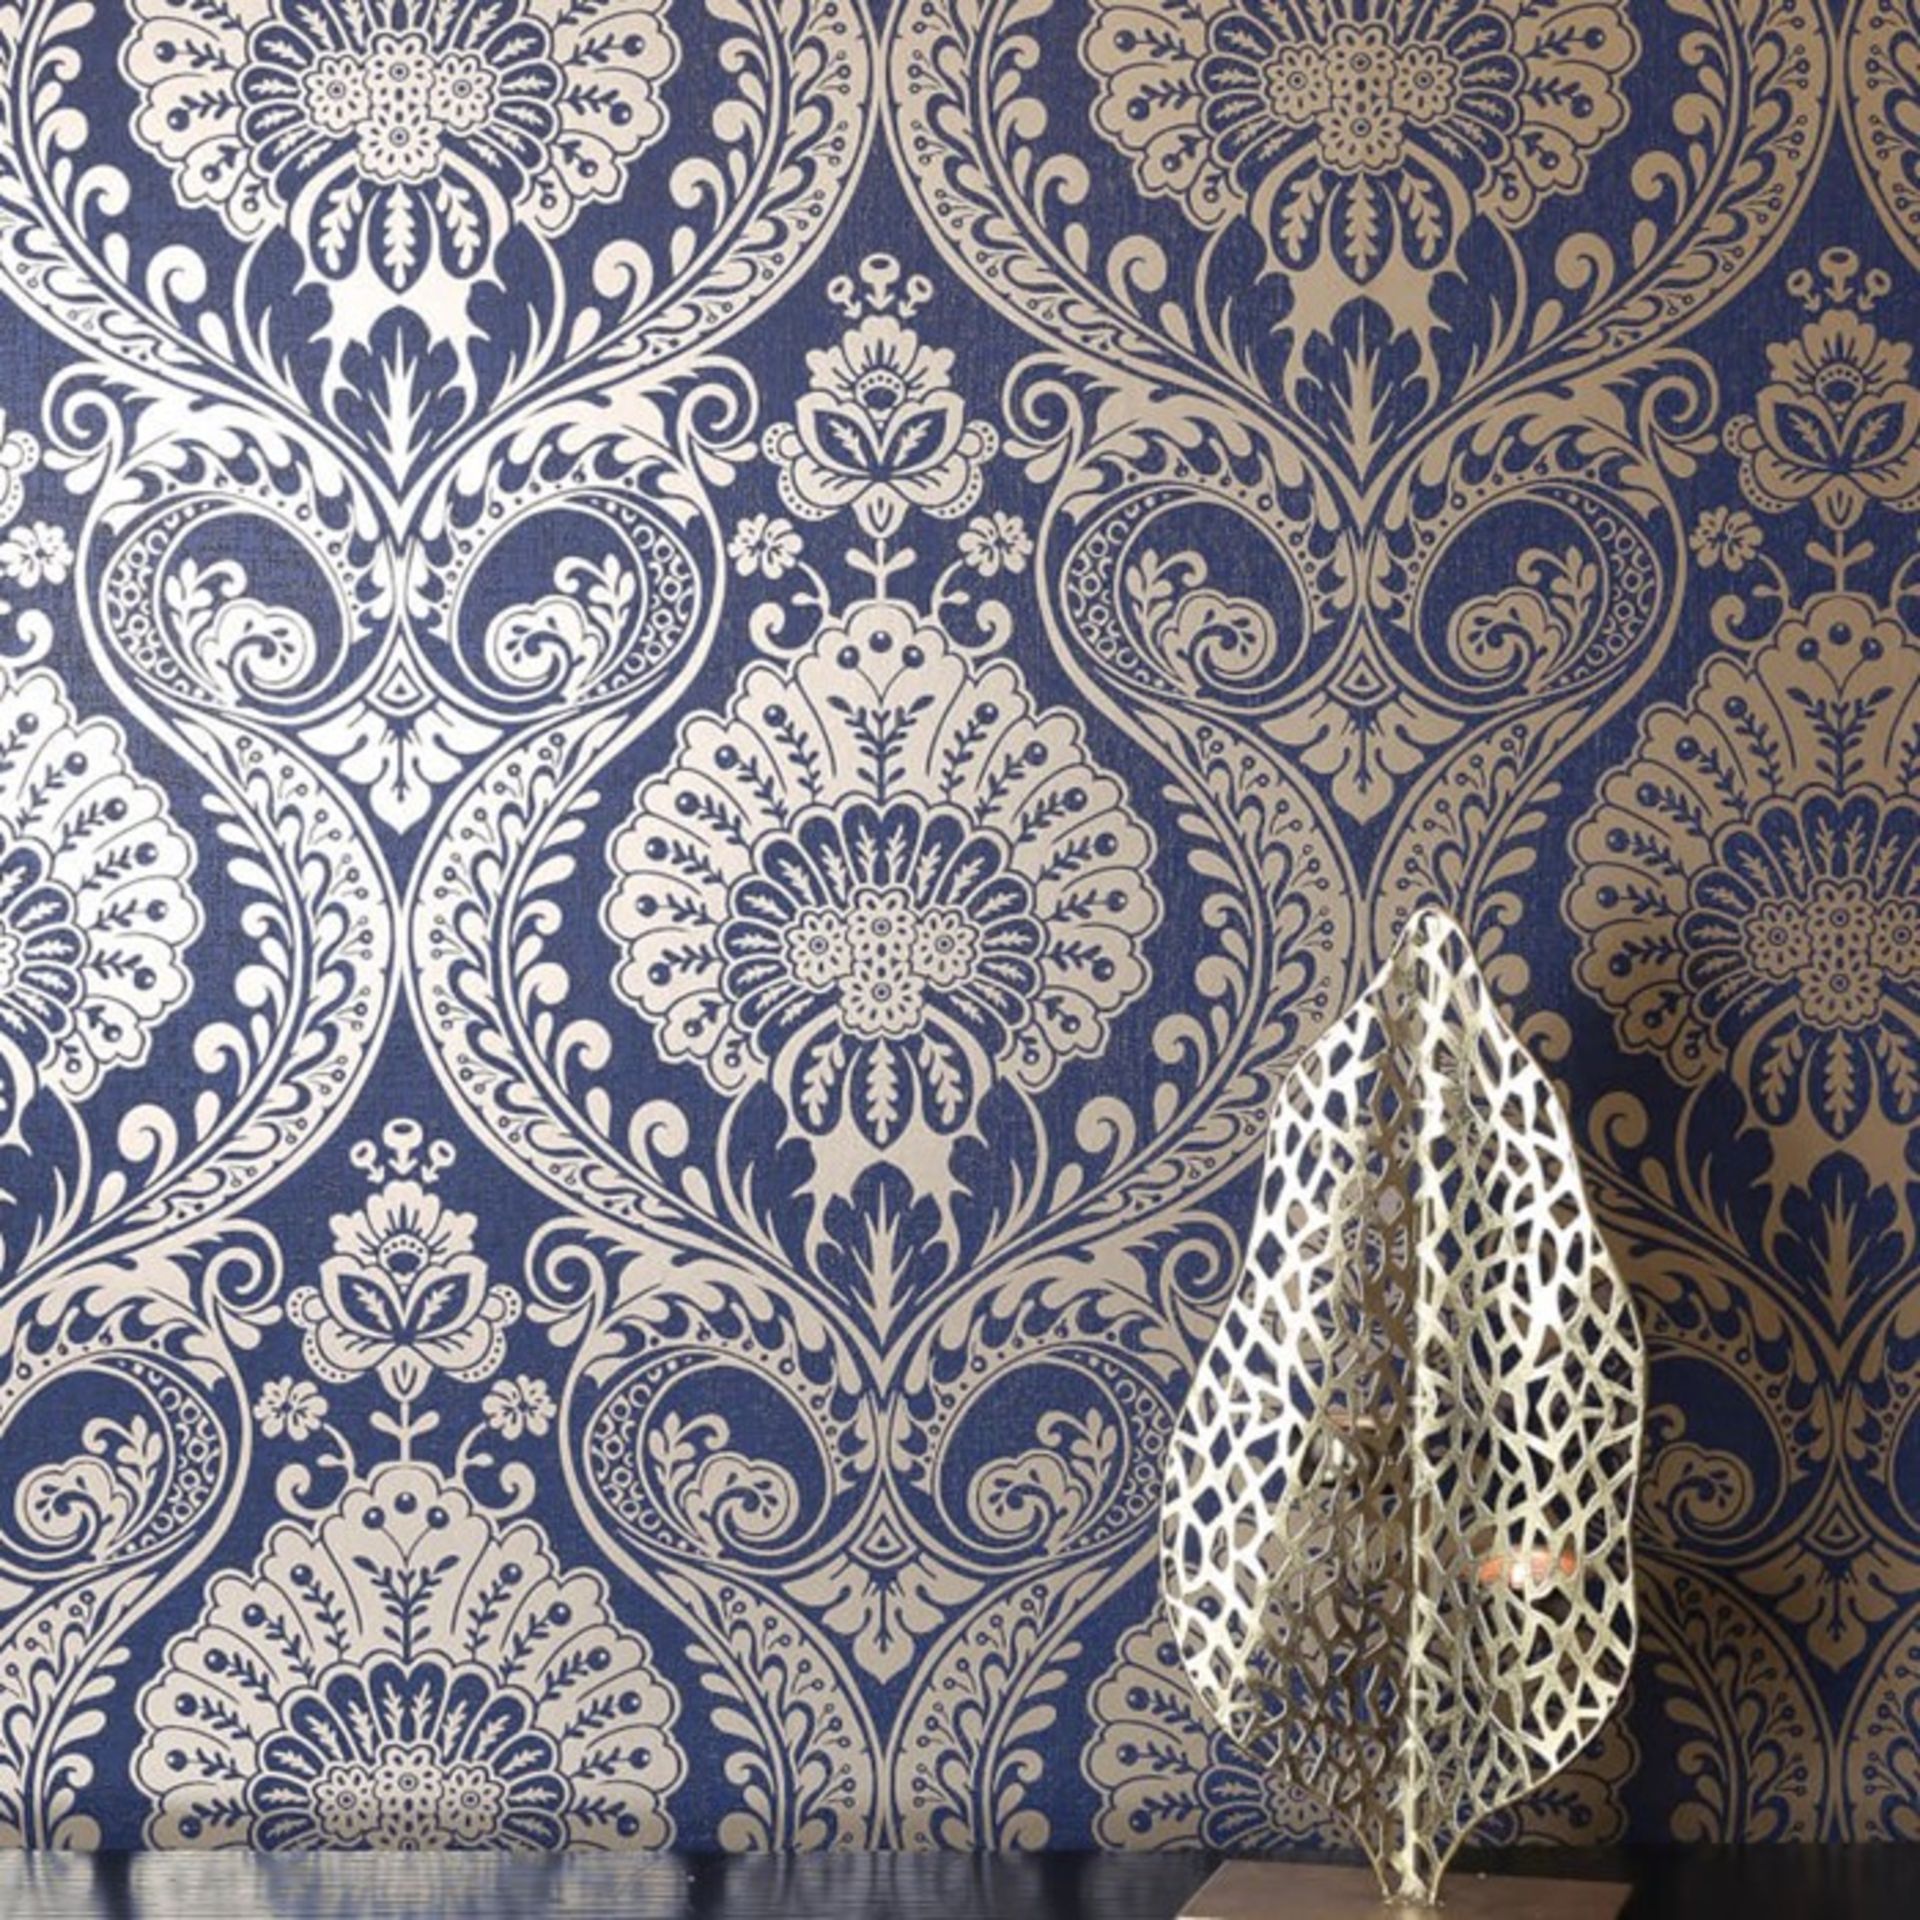 1 LOT TO CONTAIN 3 AS NEW ROLLS OF ARTHOUSE DECORIS DAMASK NAVY GOLD WALLPAPER - 910308 / RRP £38.97